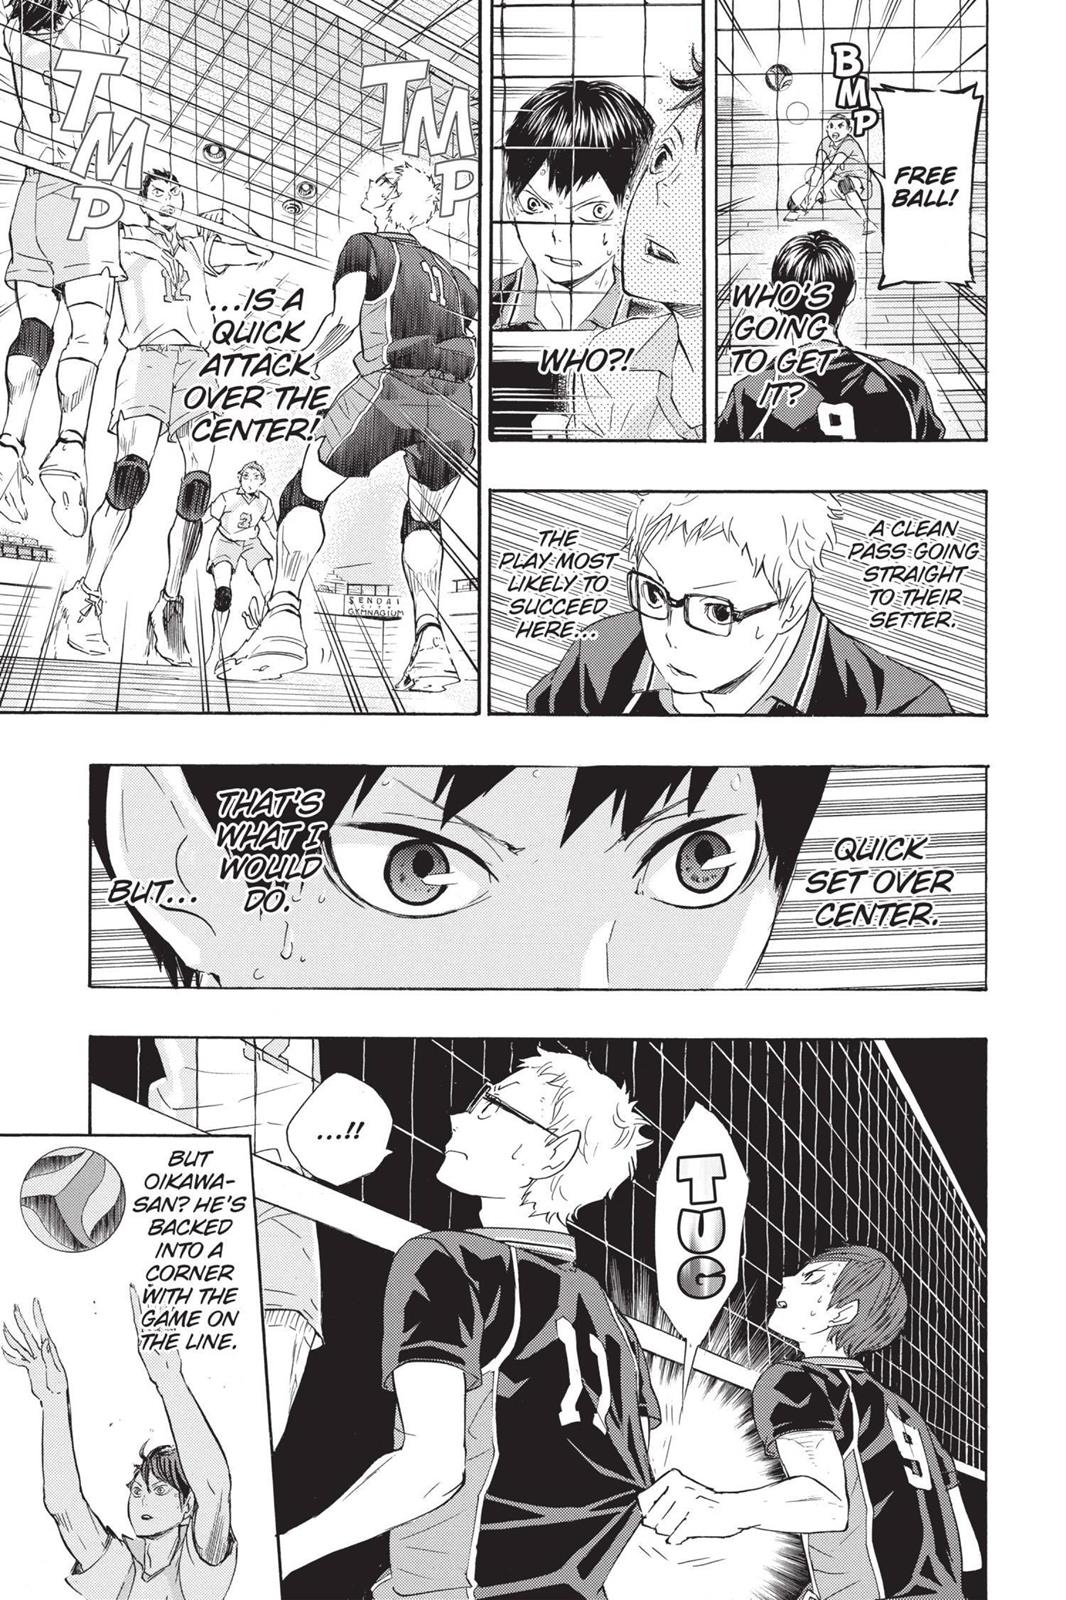  Chapter 60 image 015